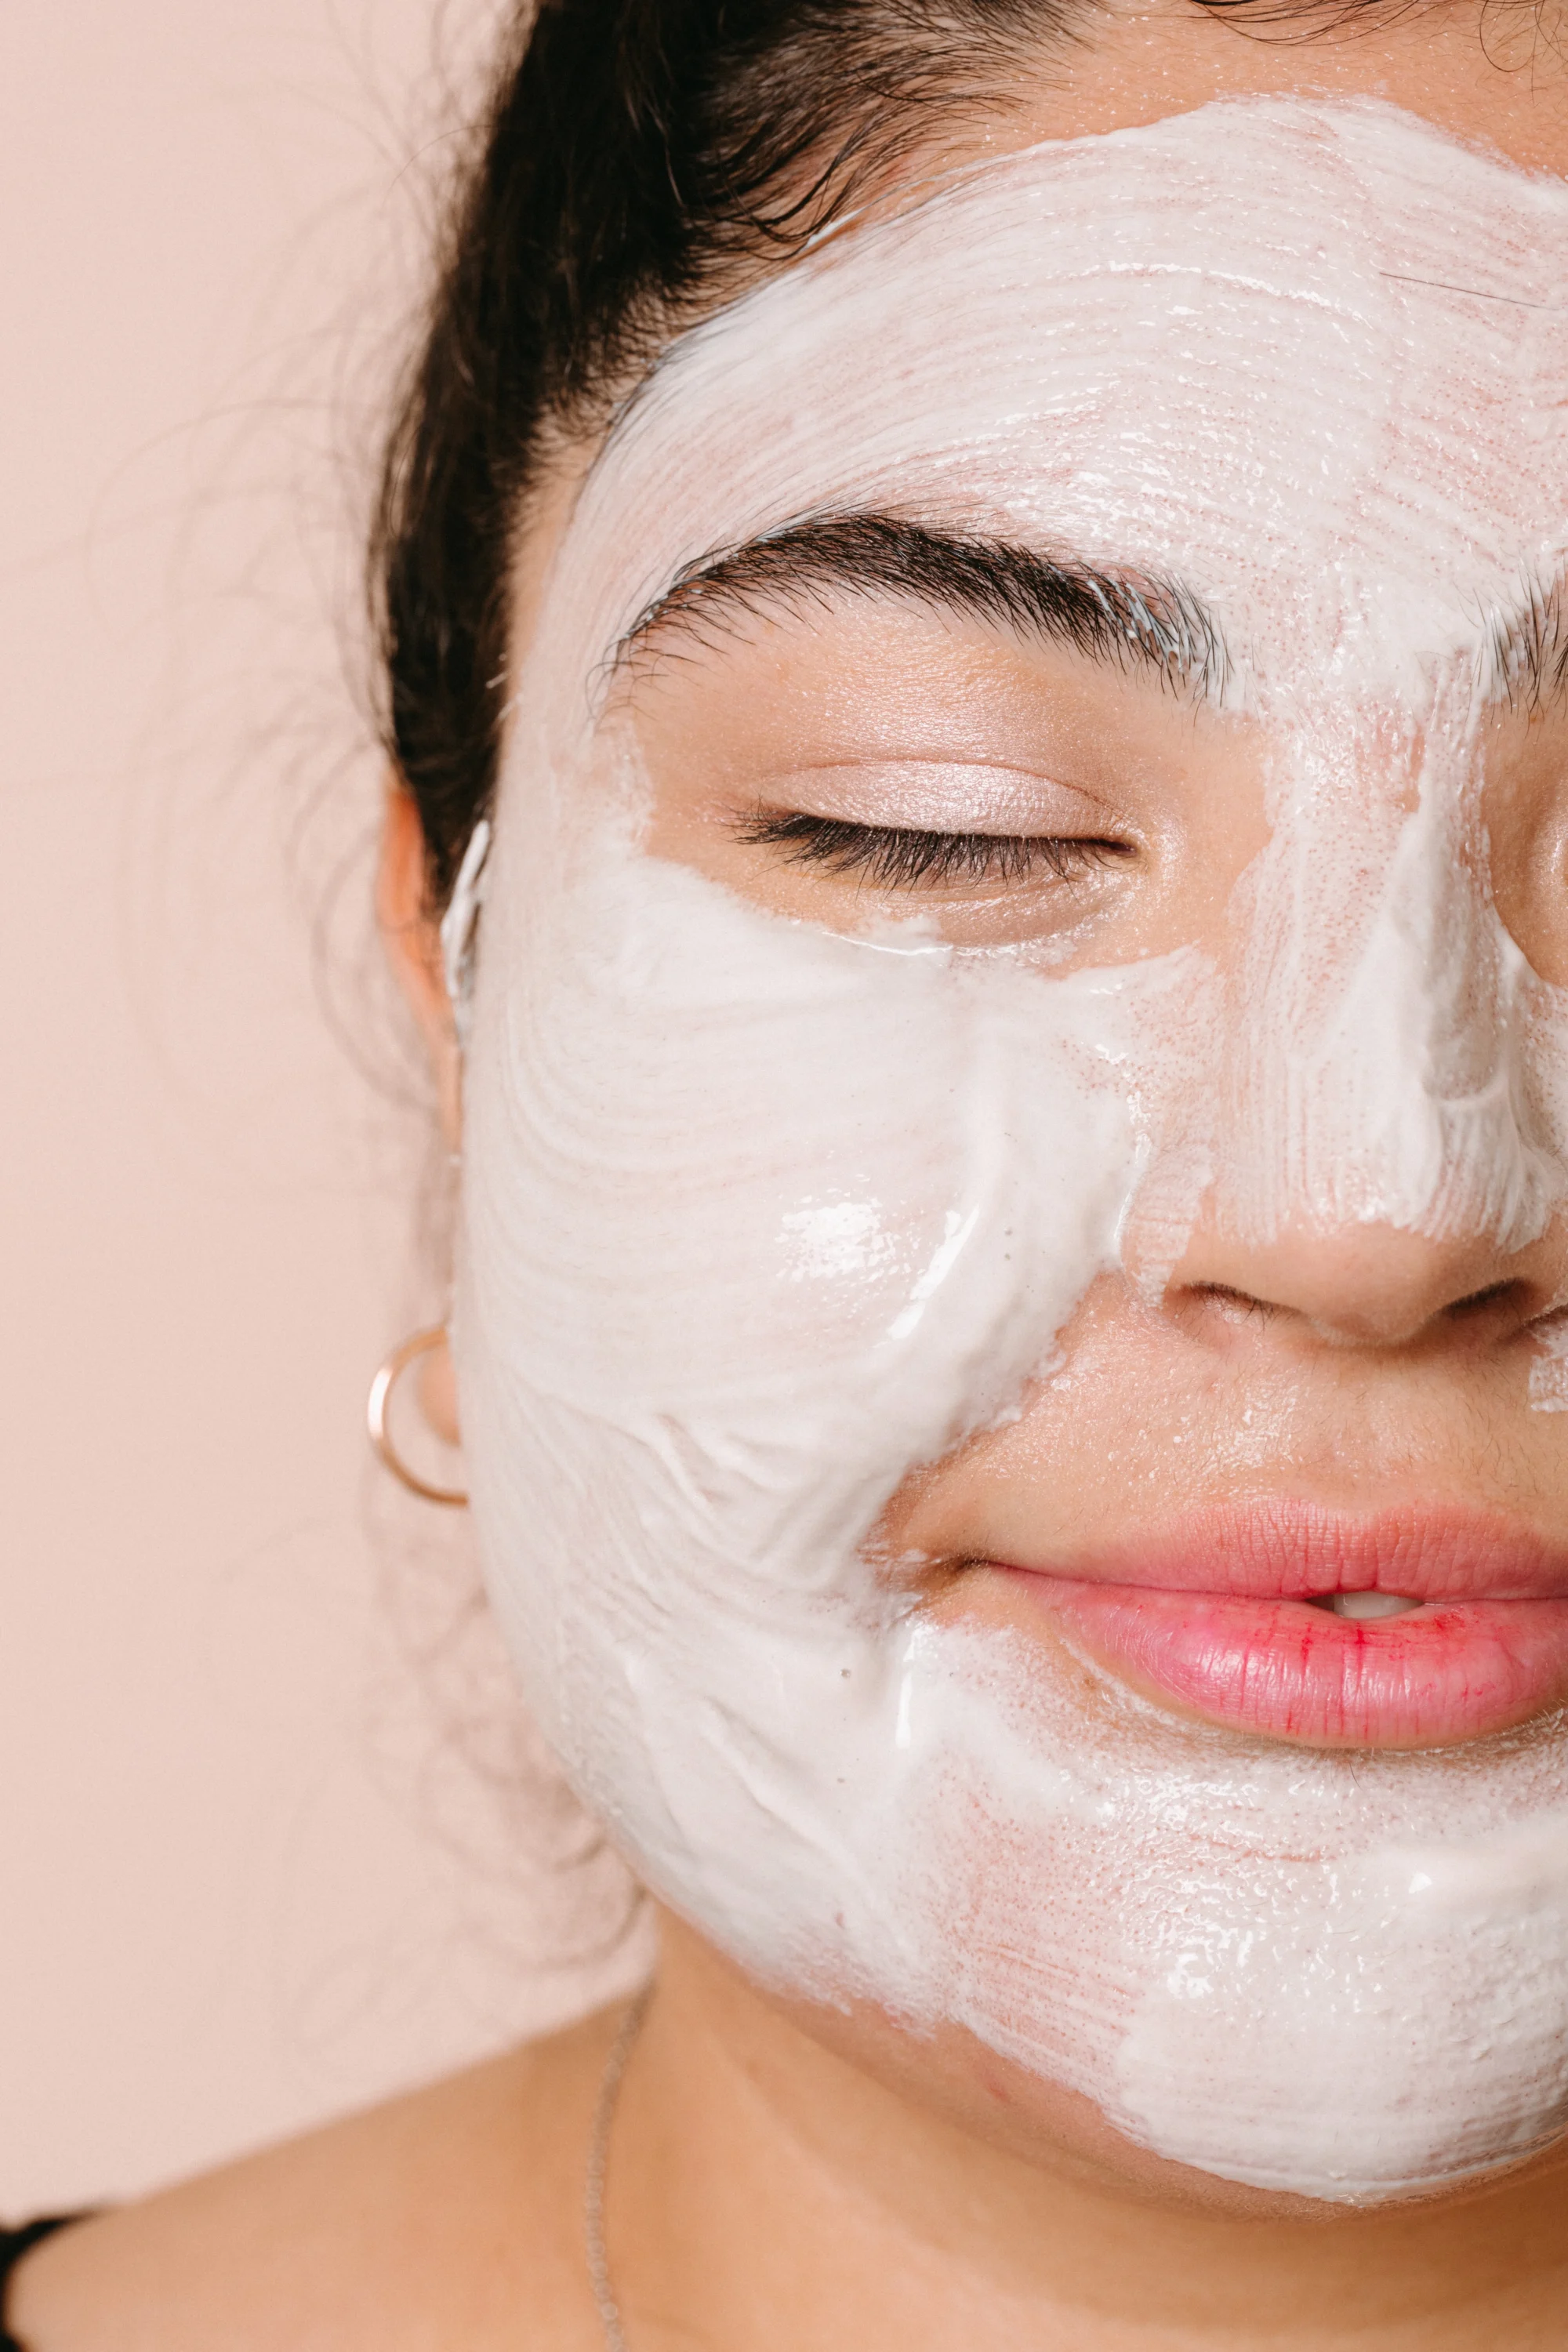 safe swaps for diy at-home skincare